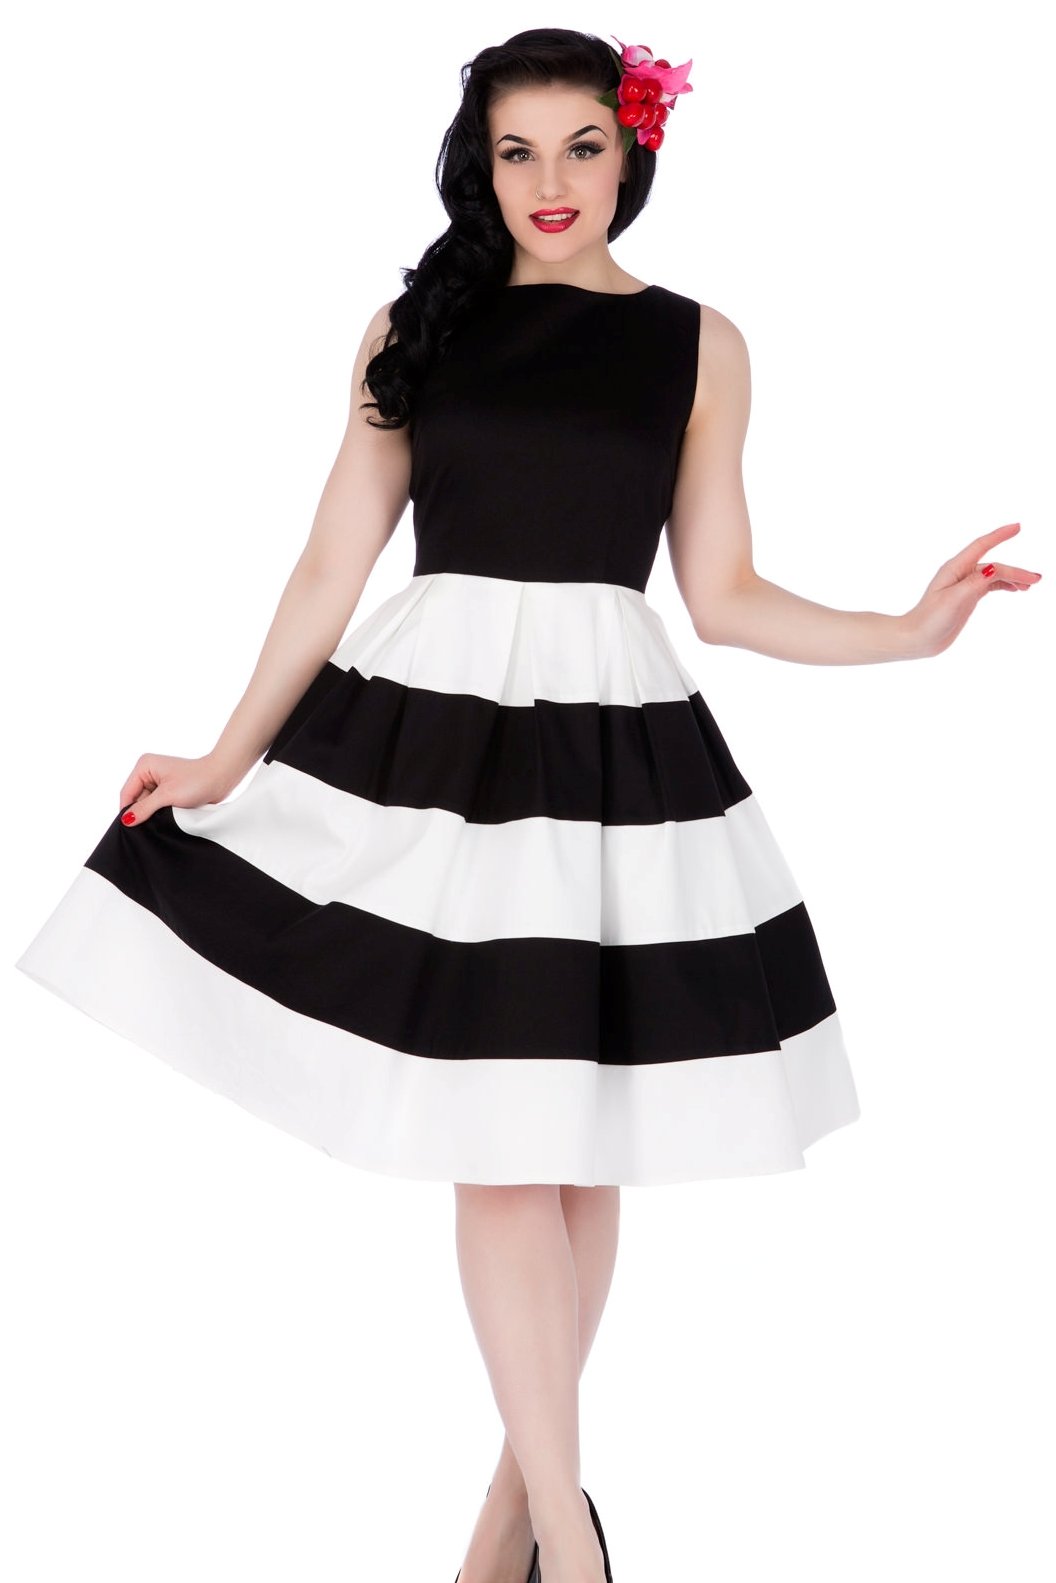 Model wearing our black and white striped Anna sleeveless dress